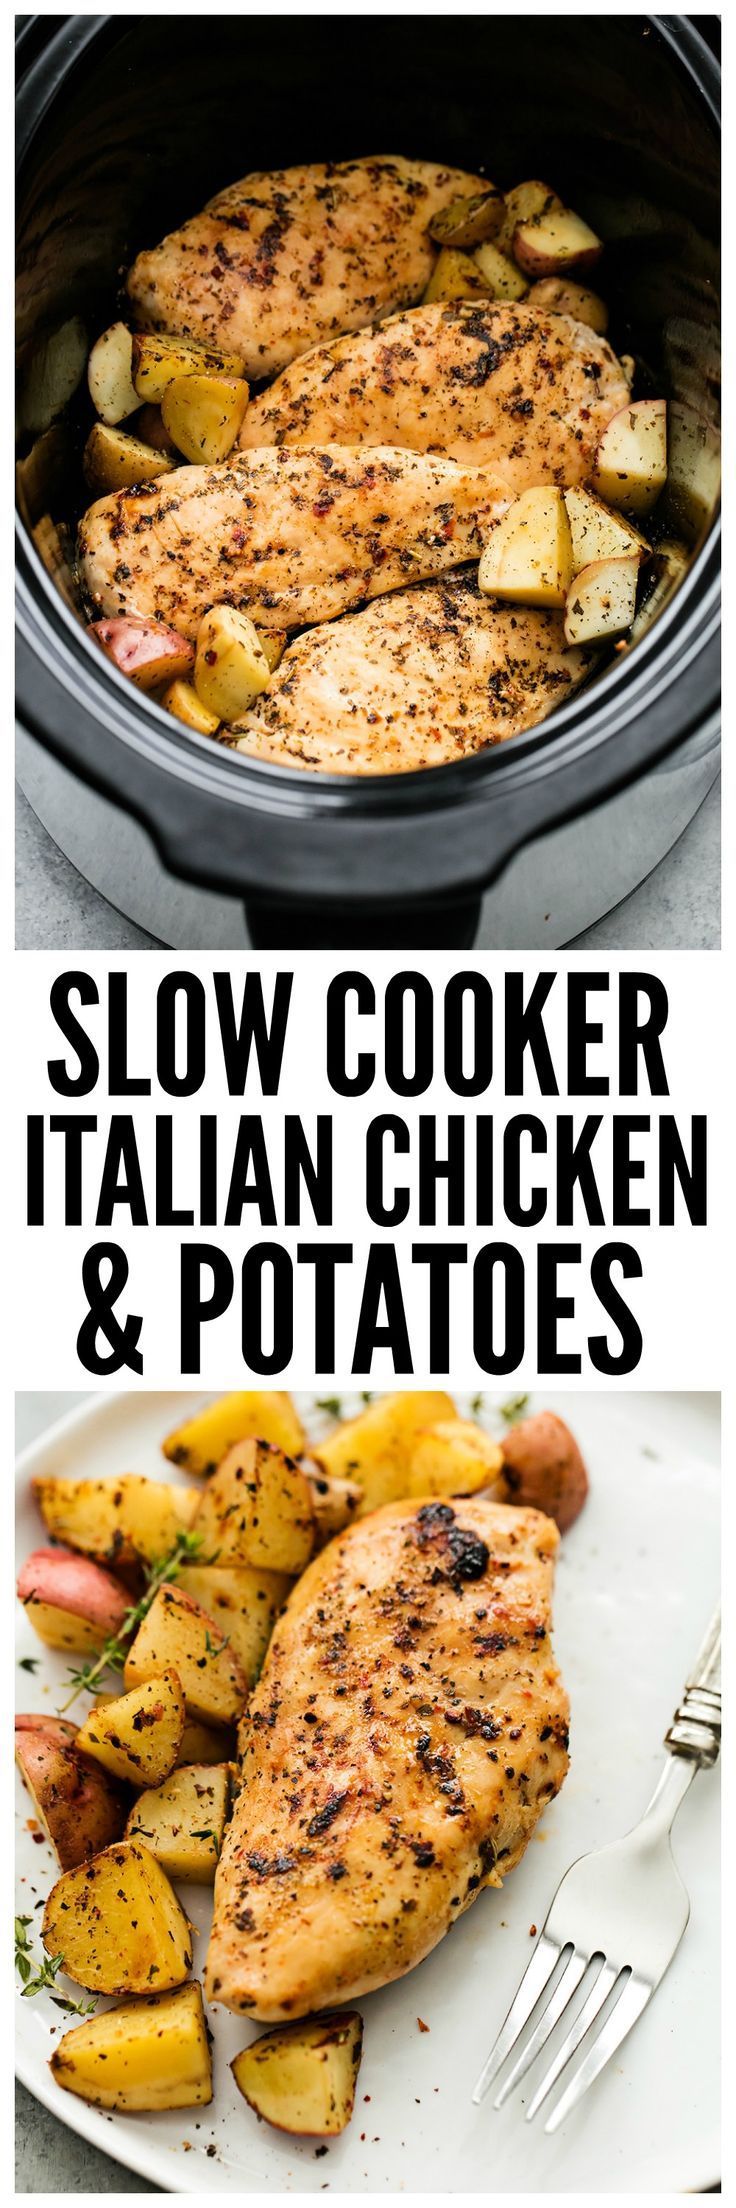 Slow Cooker Italian Chicken and Potatoes is such an easy meal to make but packed with such amazing flavor! The entire family will